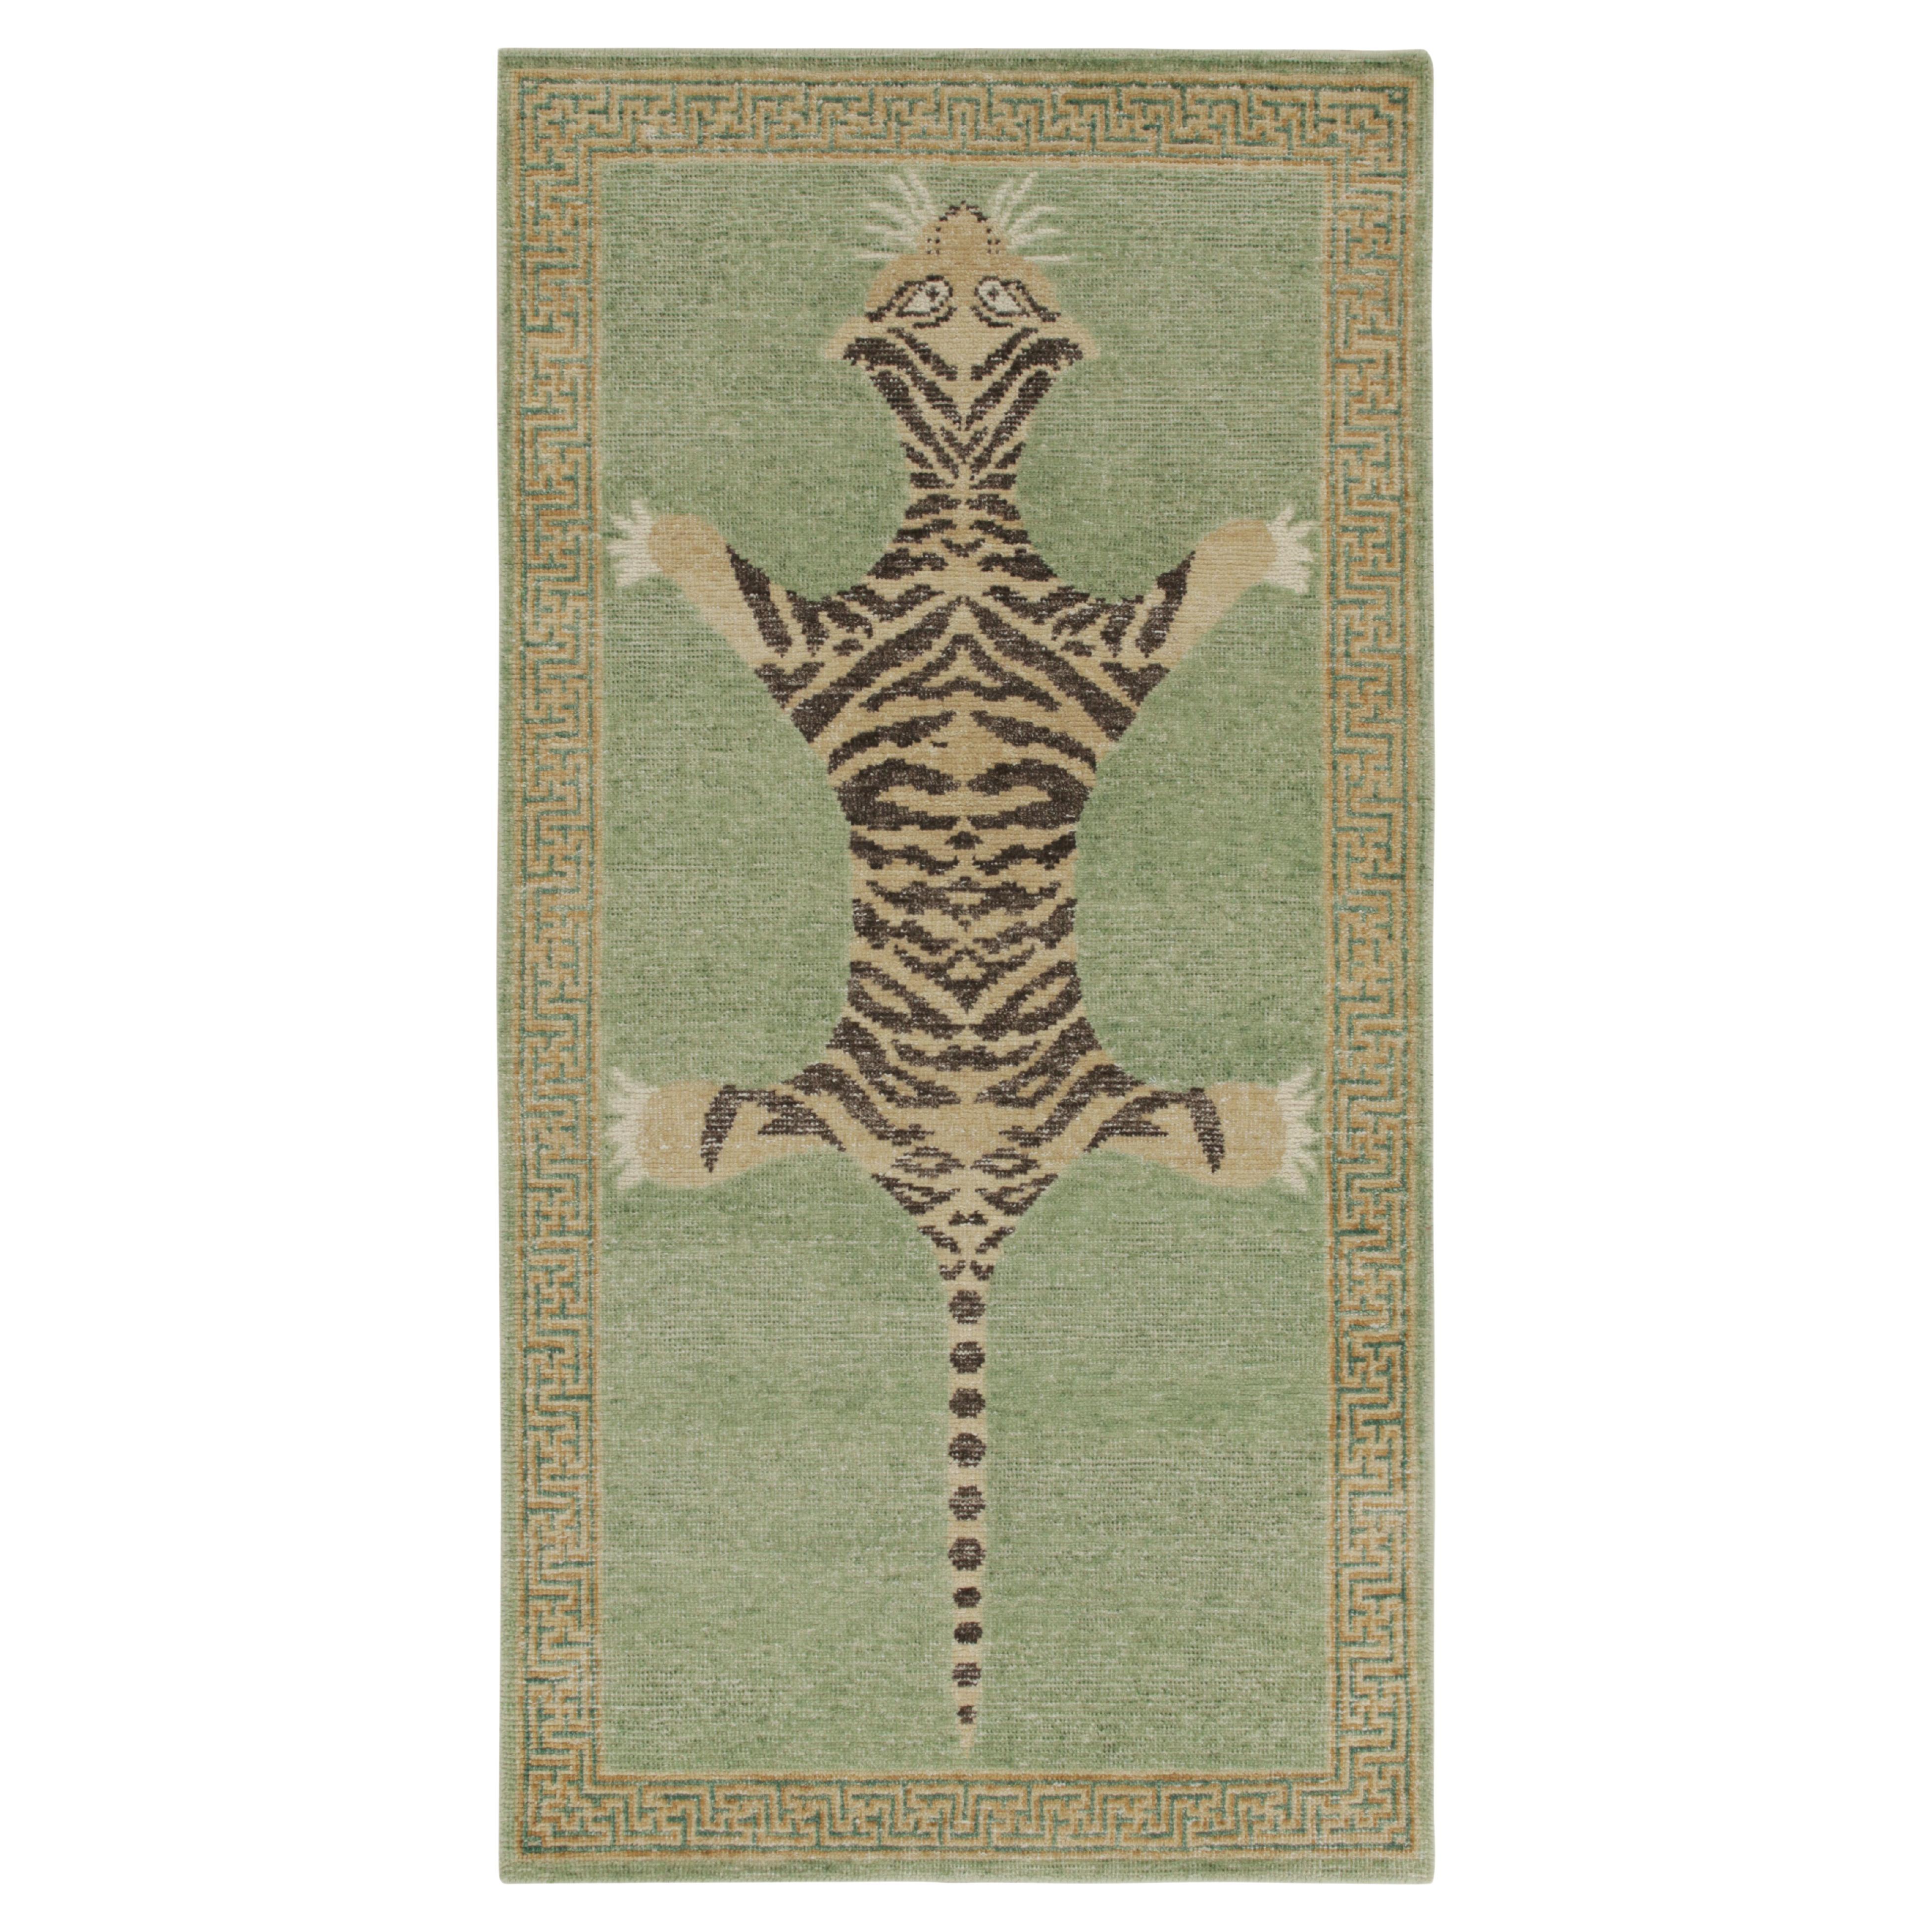 Rug & Kilim’s Distressed Style Tiger Runner in Green, Beige & Black Pictorial For Sale